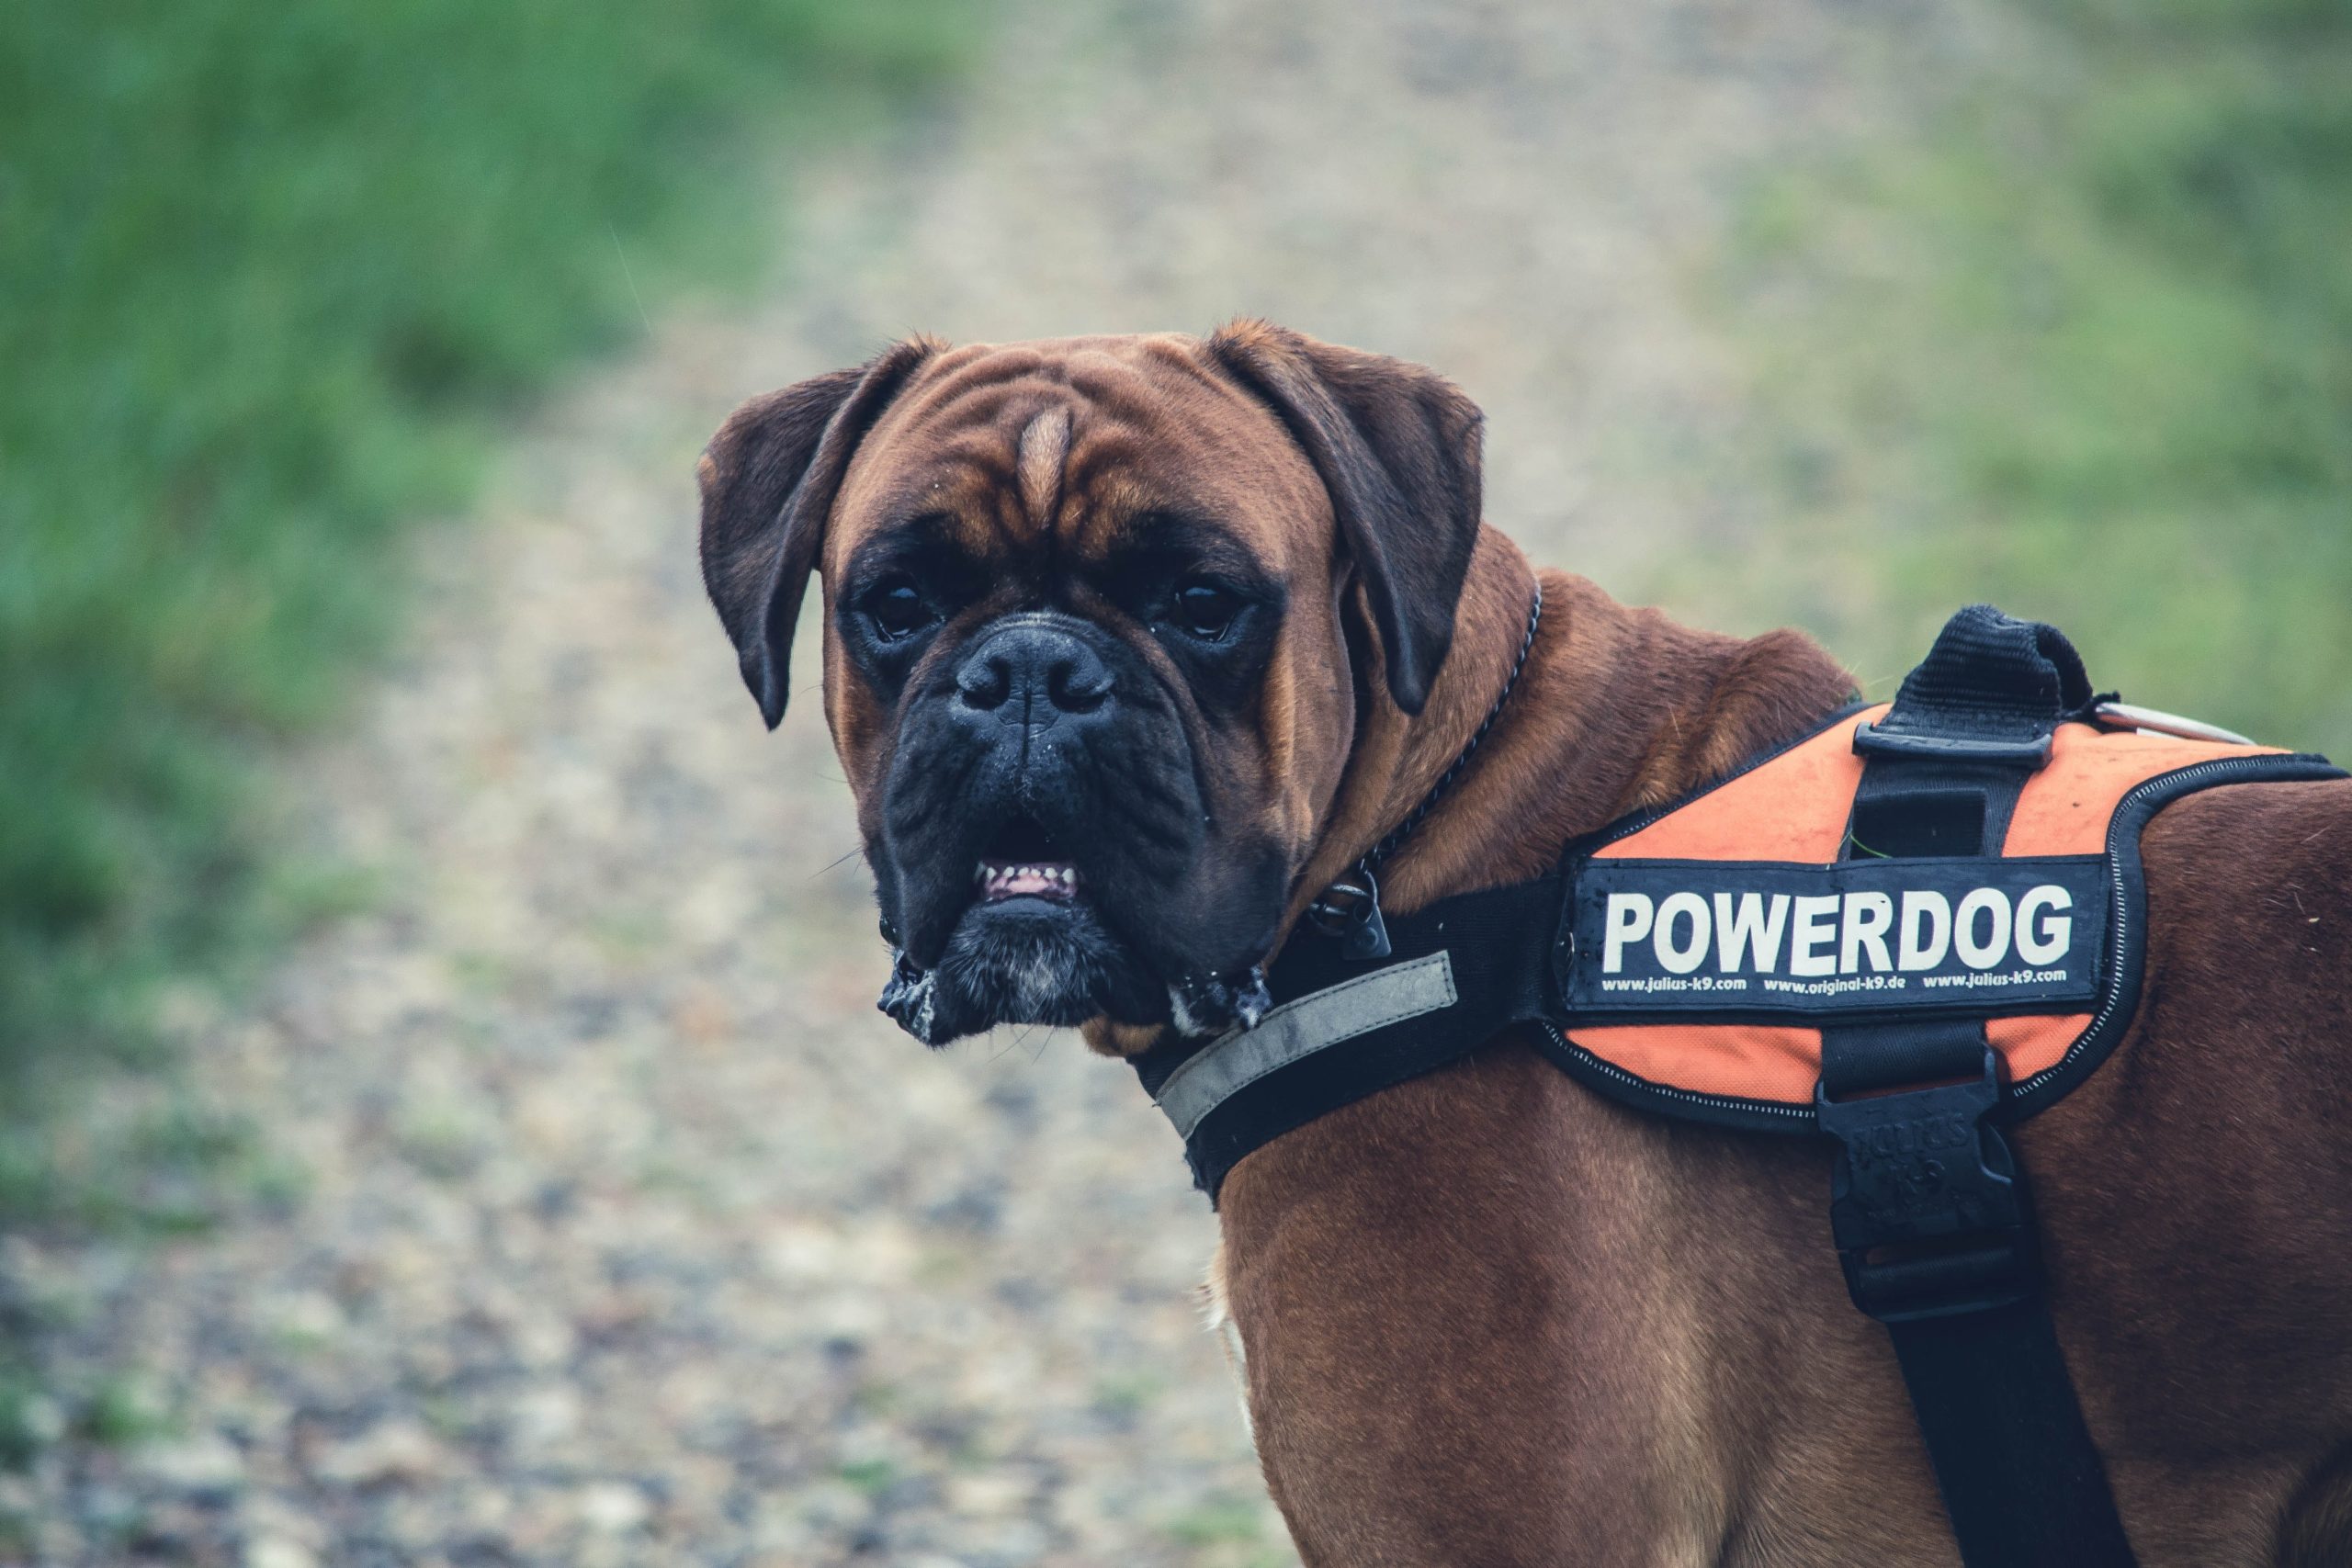 Posing your pooch as a service animal is now a crime